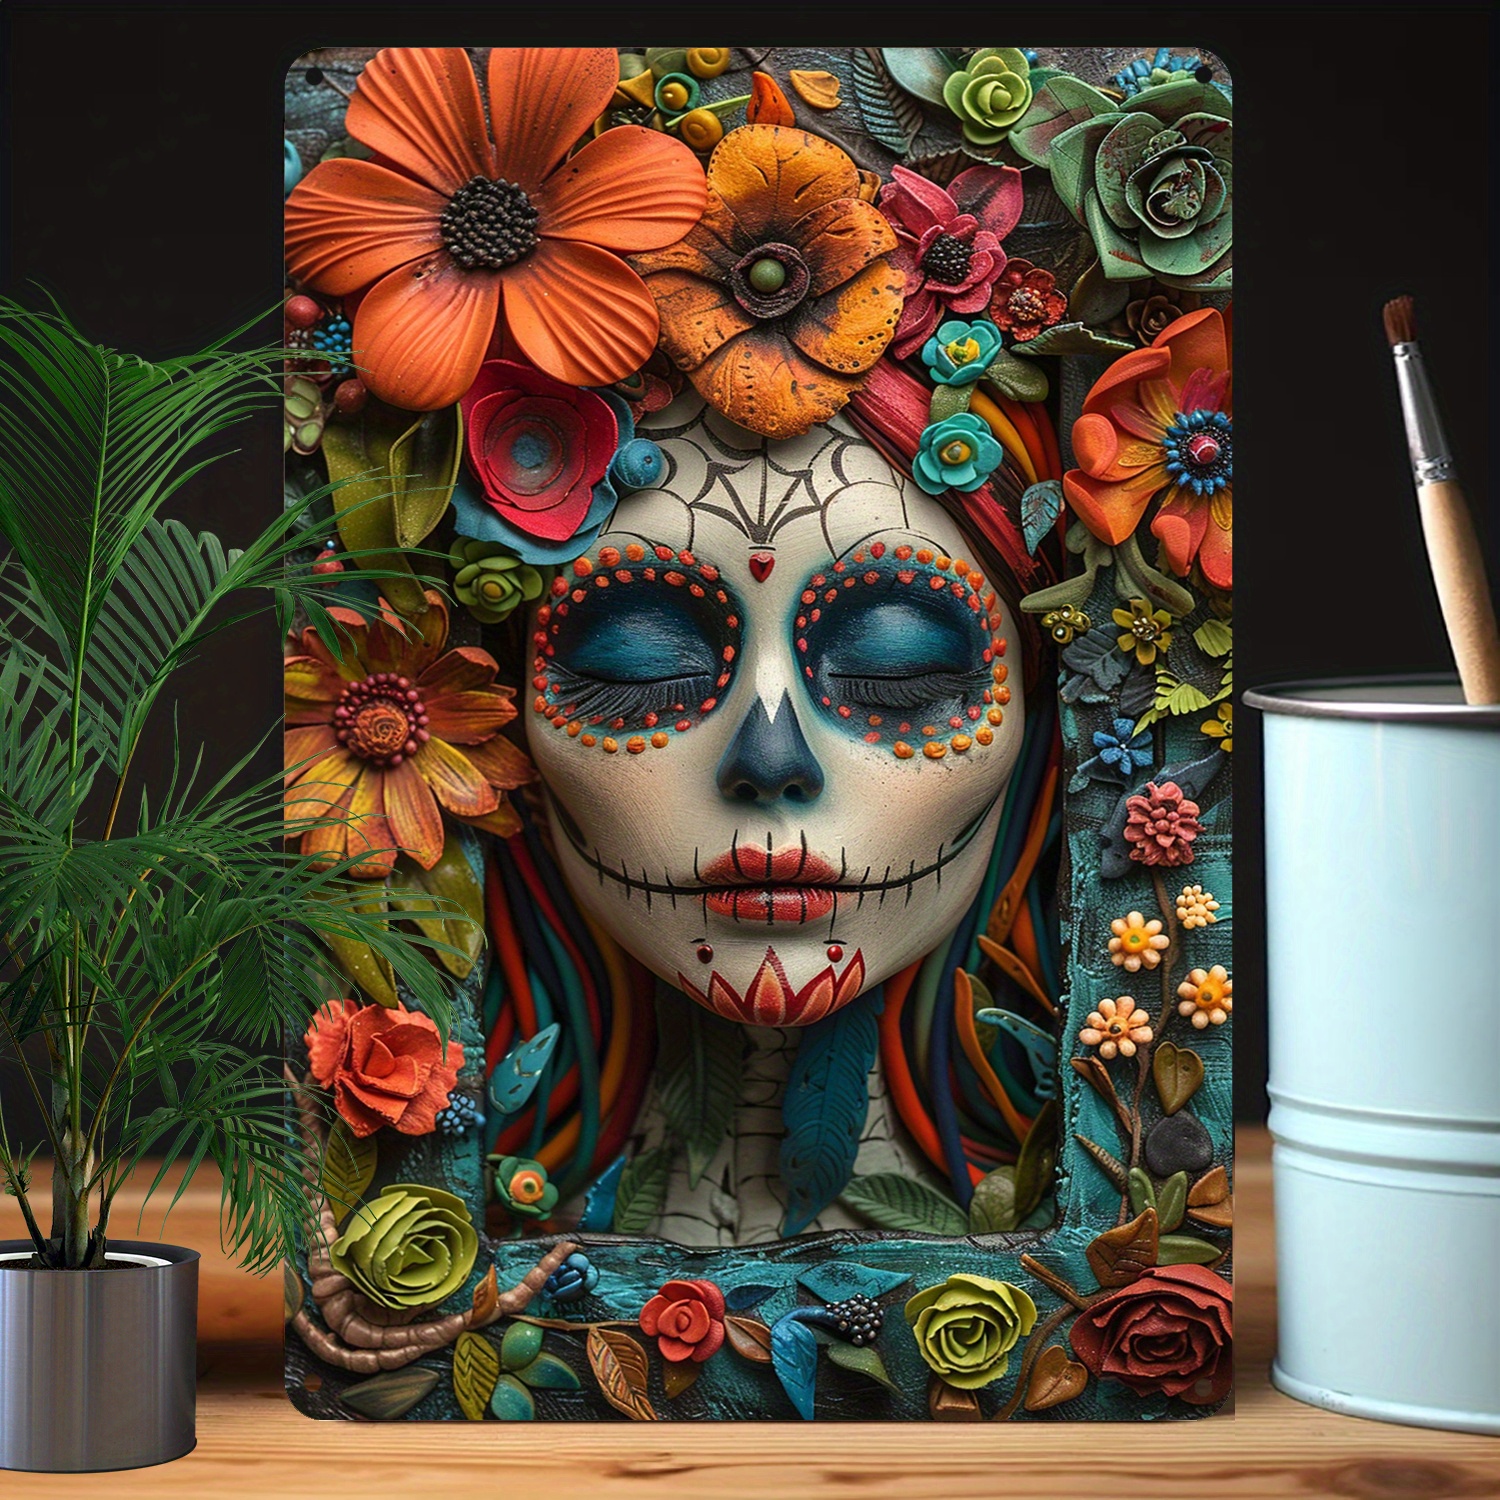 

Vintage-inspired Aluminum Tin Sign 8x12" - Perfect For Spring & Summer Decor, Ideal For Apartments, Offices, Kitchens, Studios, Classrooms - Funny Easter & Day Of The Dead Themes